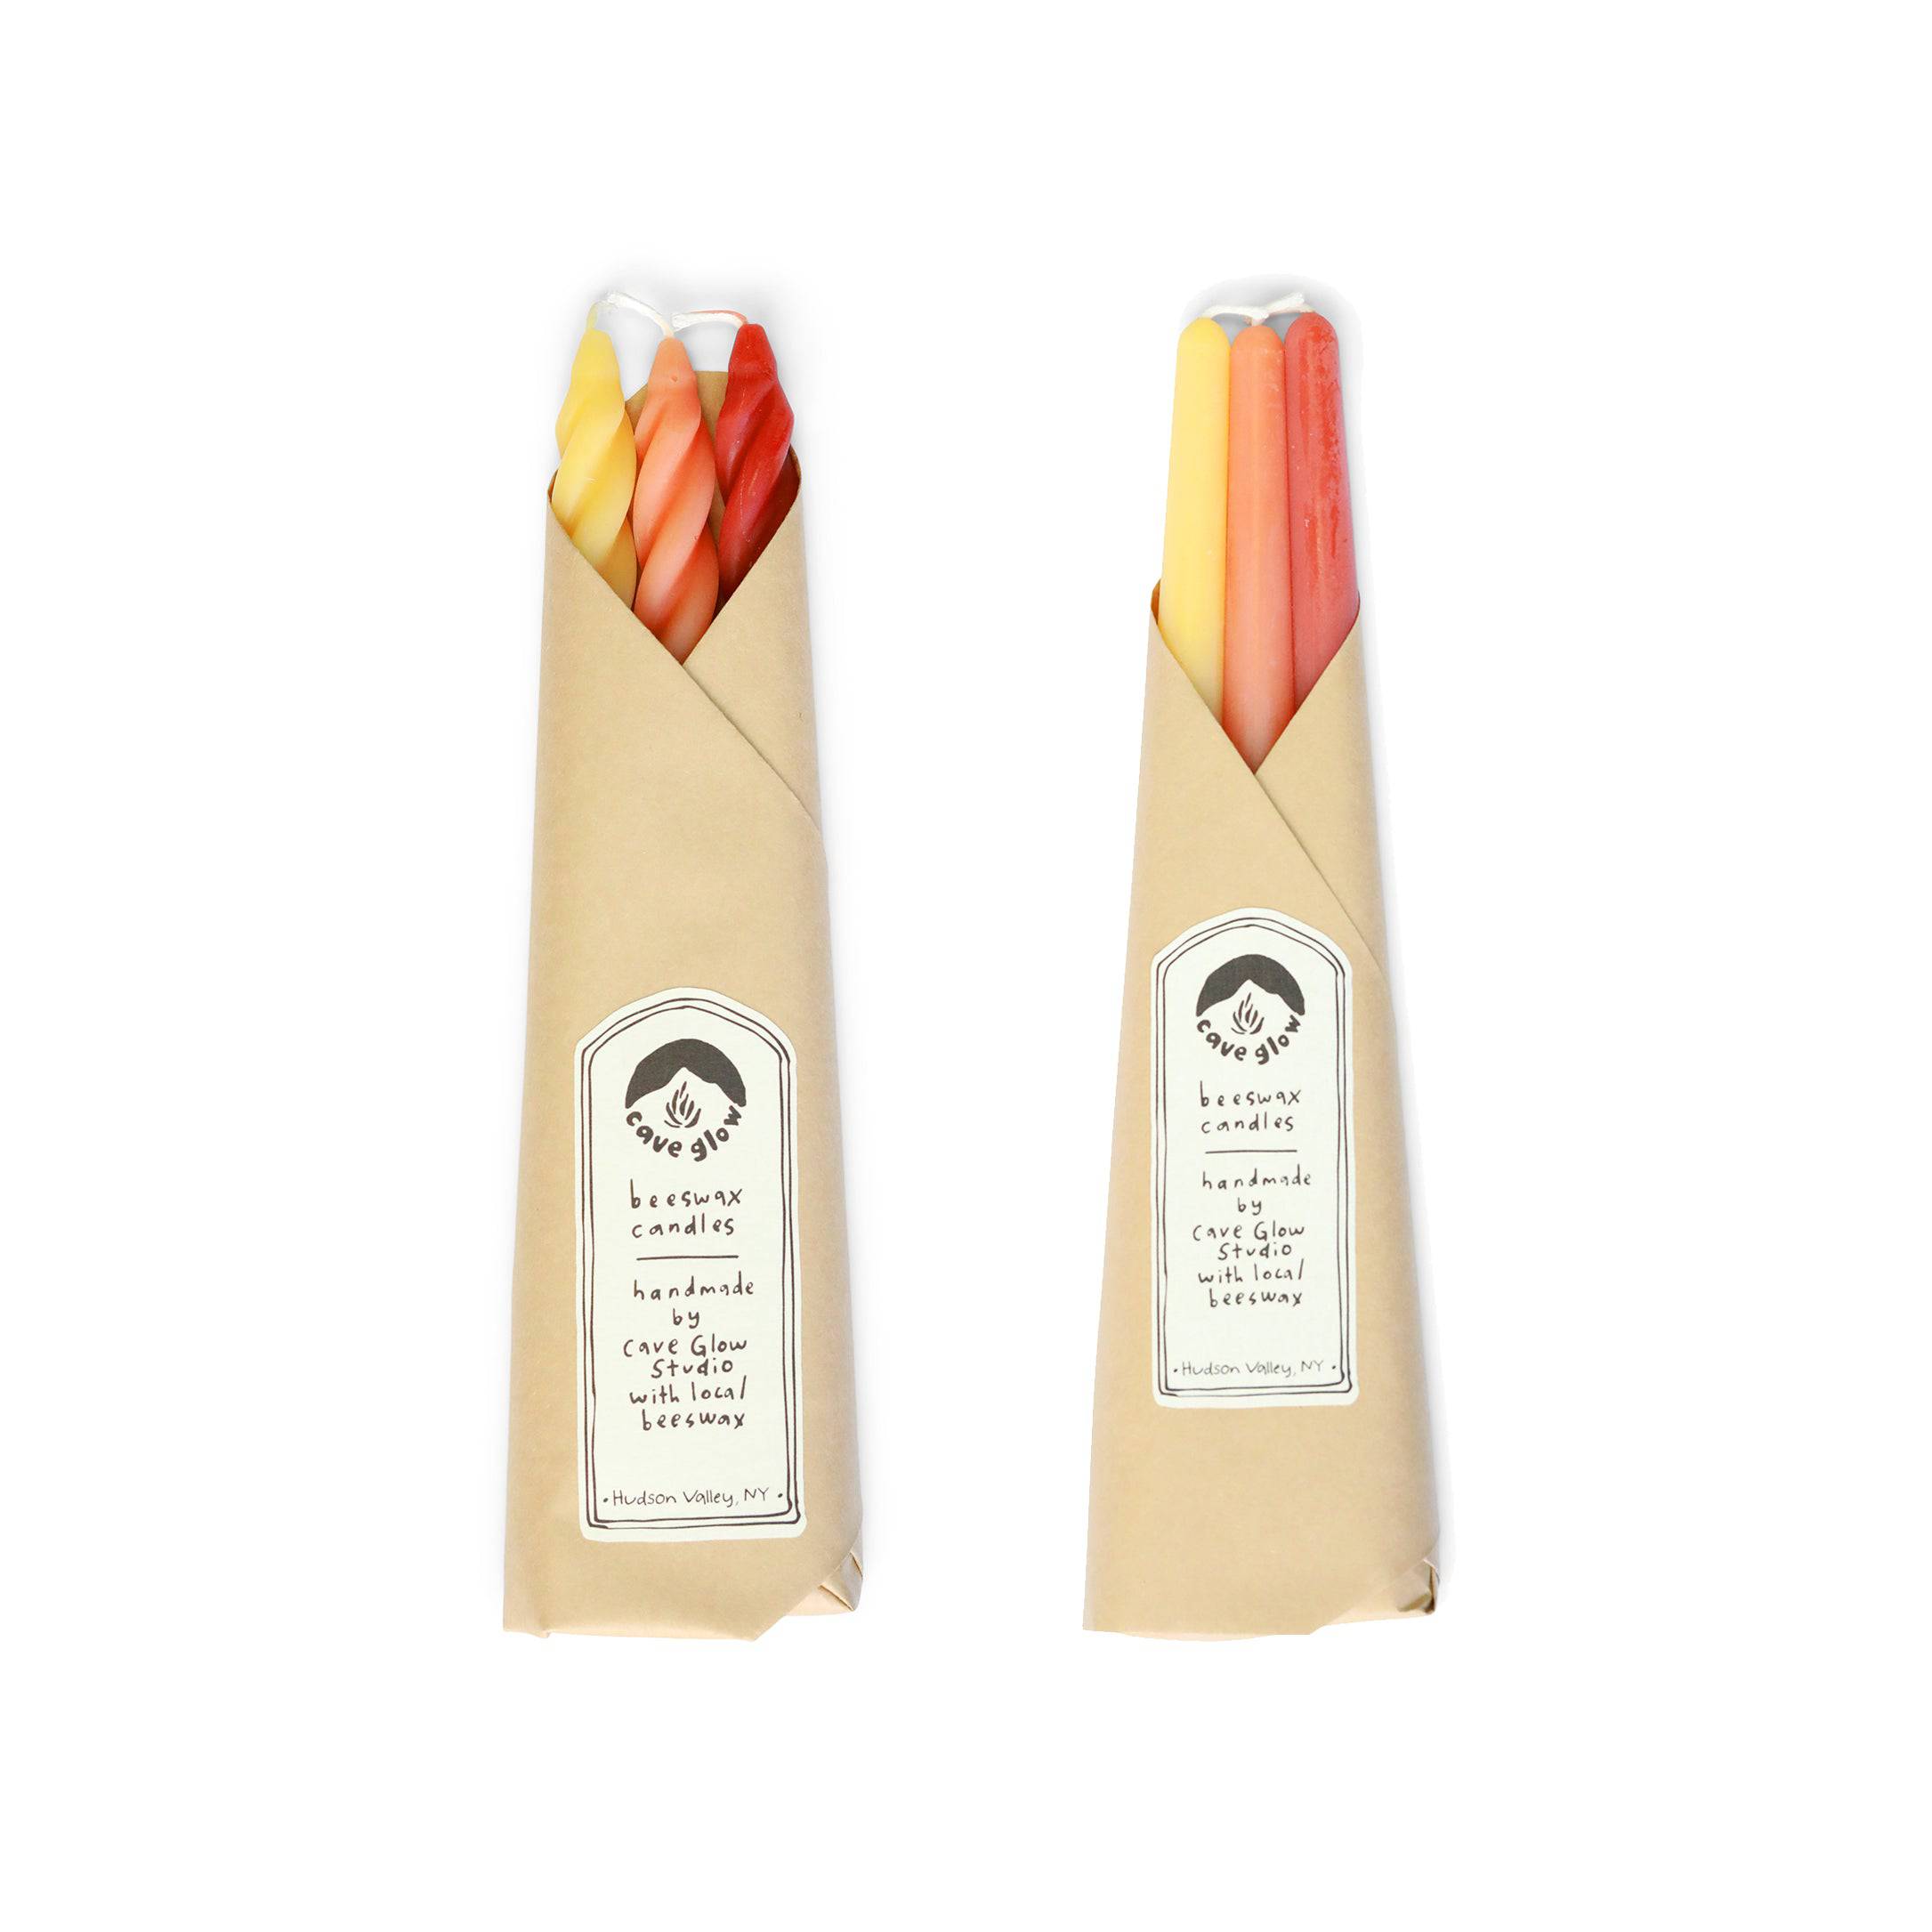 The Sunrise Taper Beeswax Candle -Set of 3 - The Gilded Witch